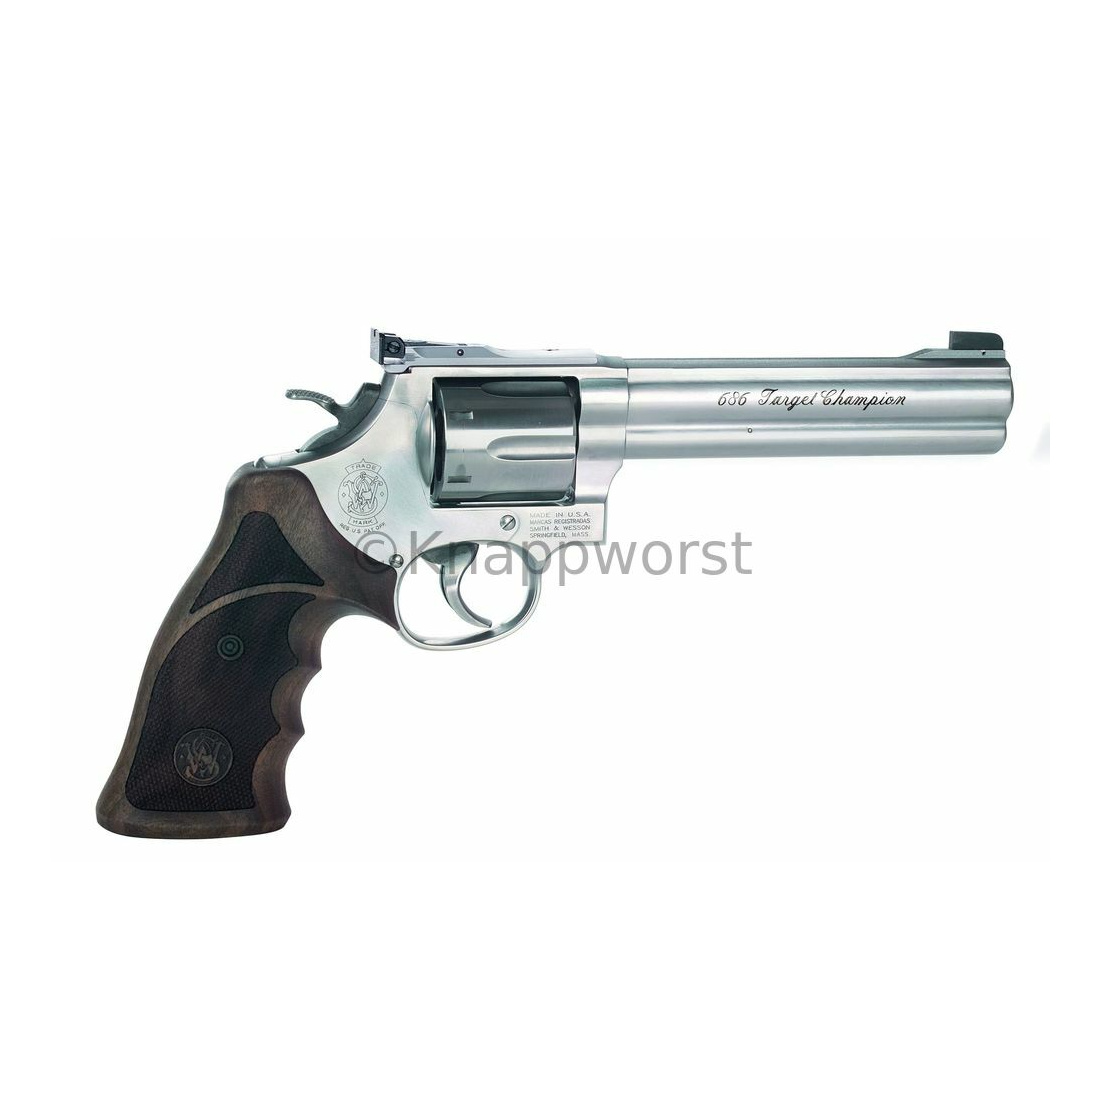 Smith & Wesson	 S&W 686 Target Champion